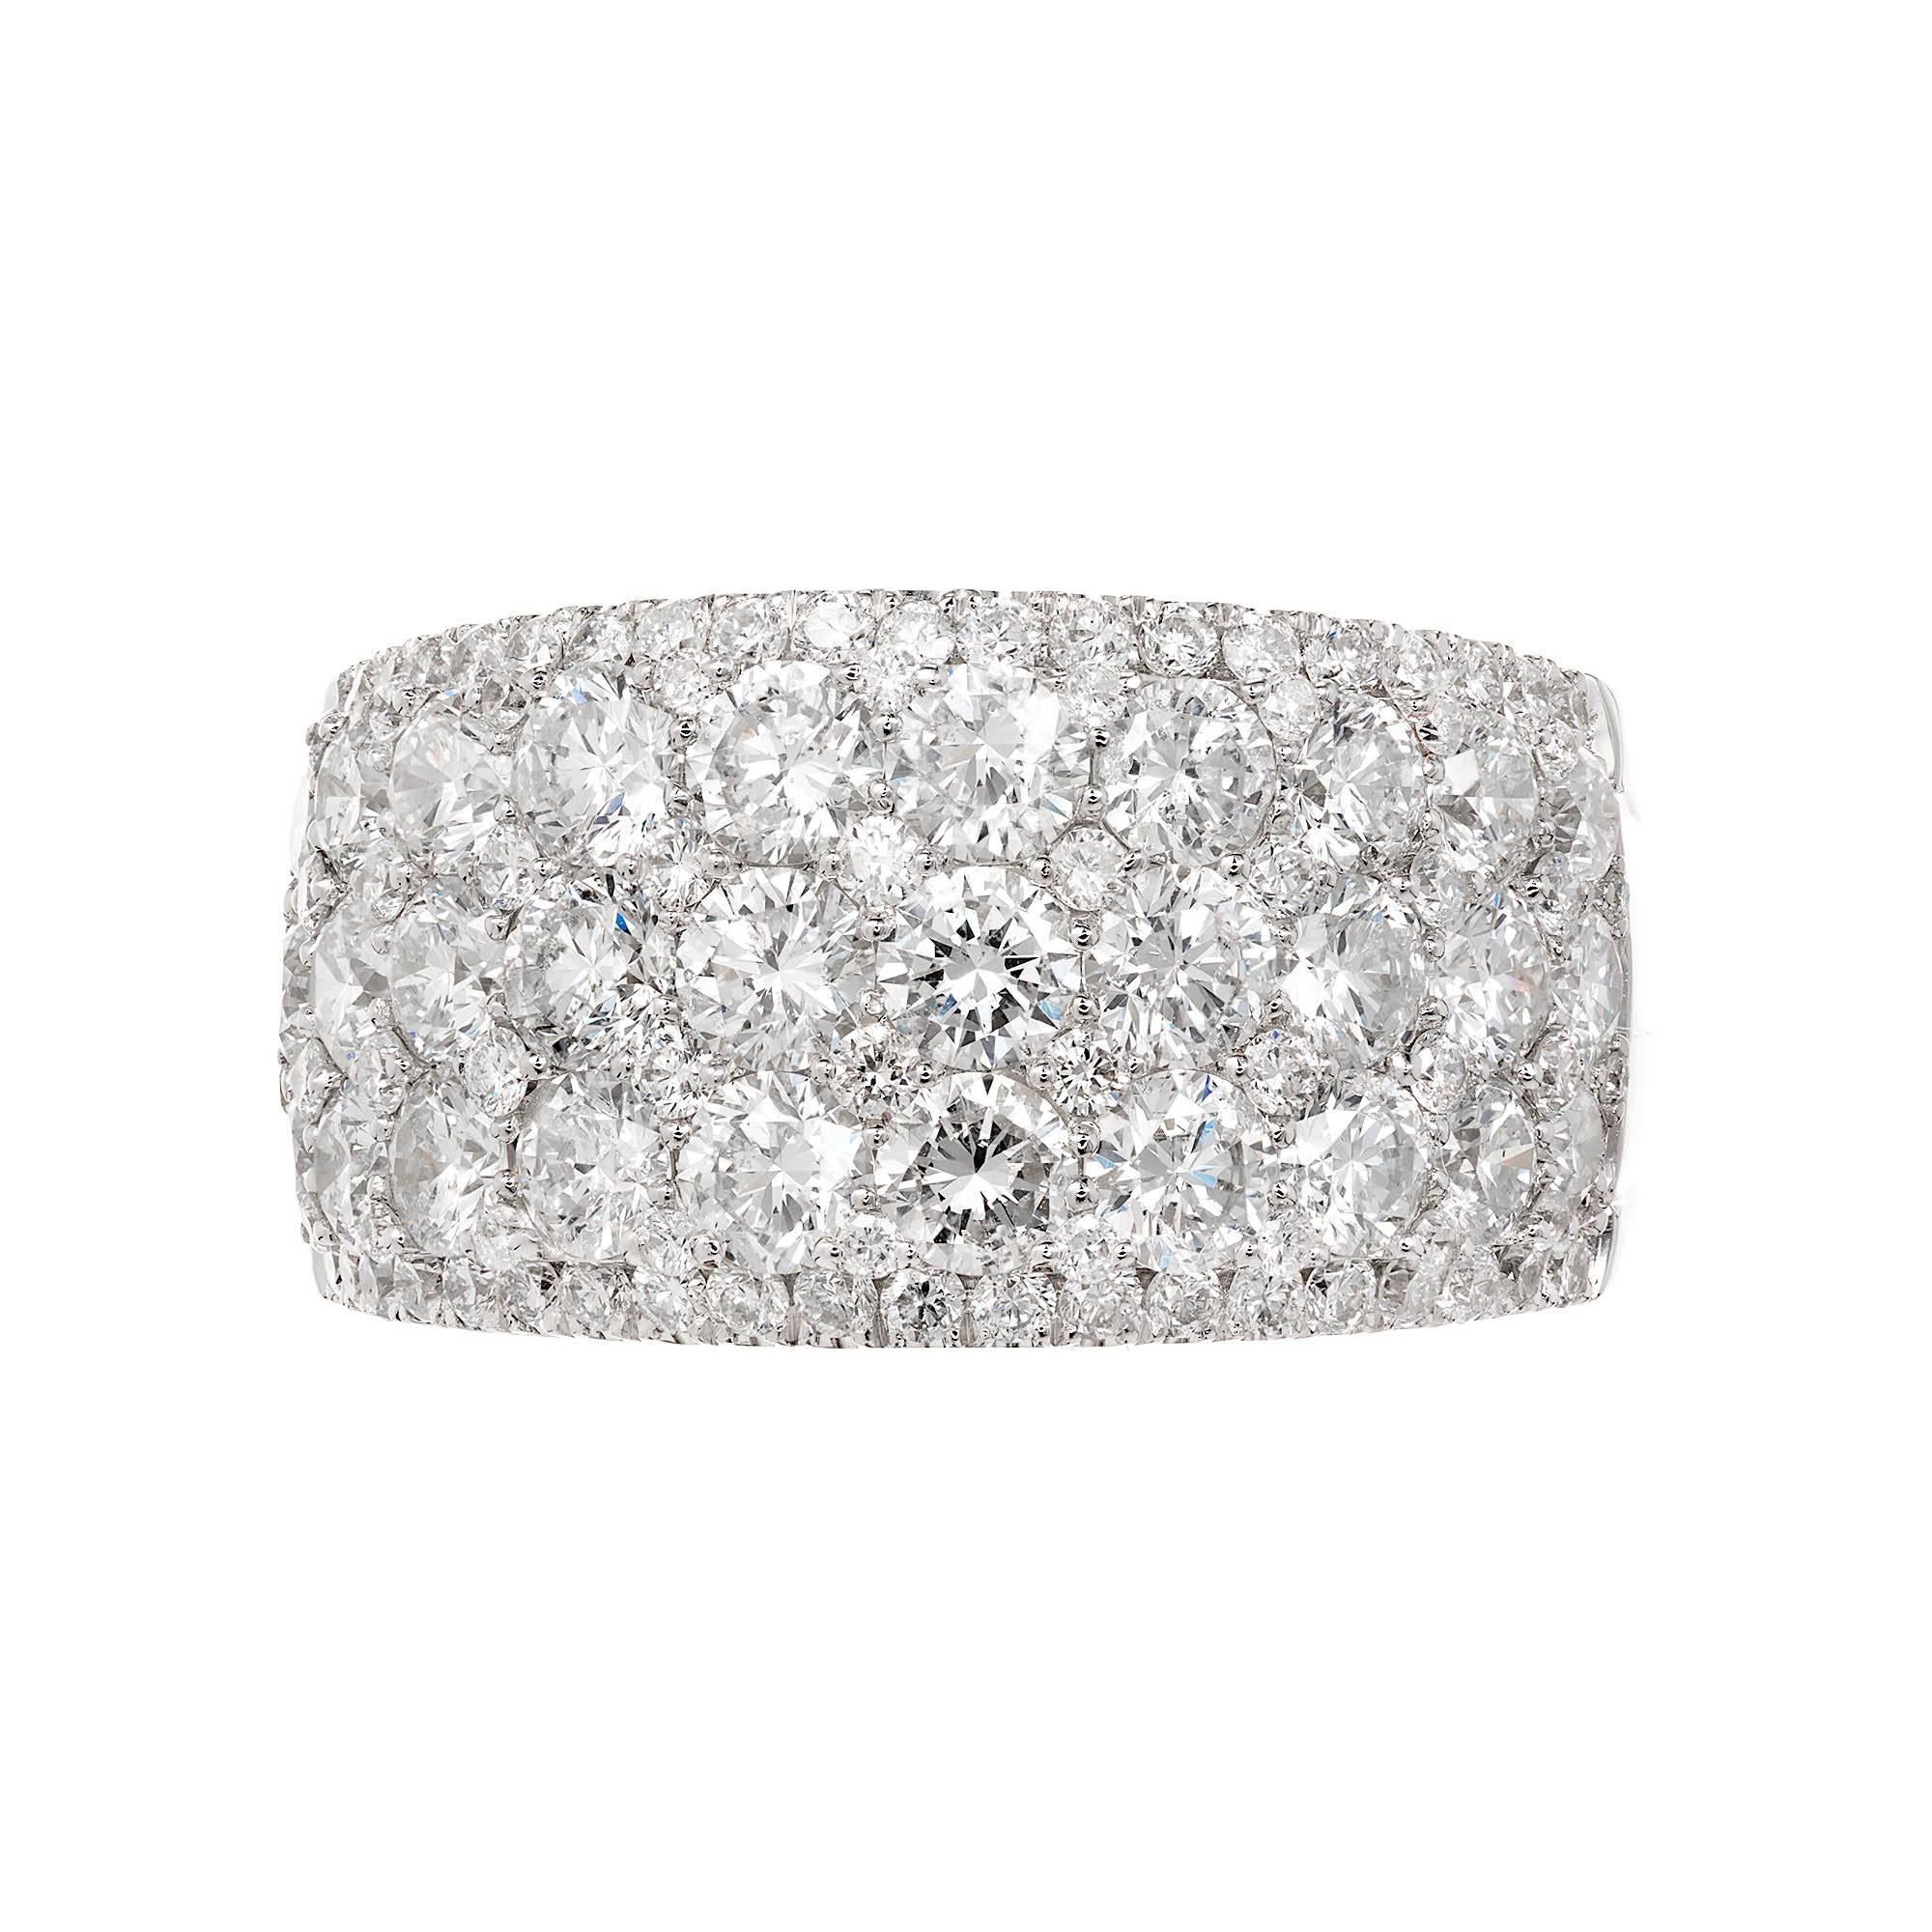 5 row 12mm wide tapered Diamond band with bright sparkly full cut Diamonds 3.90ct total defects.

110 round brilliant cut Diamonds, approx. total weight 3.90cts, F – G, VS1 – SI1
Size 7 and sizable
14k white gold
Tested and stamped: 14k
8.3